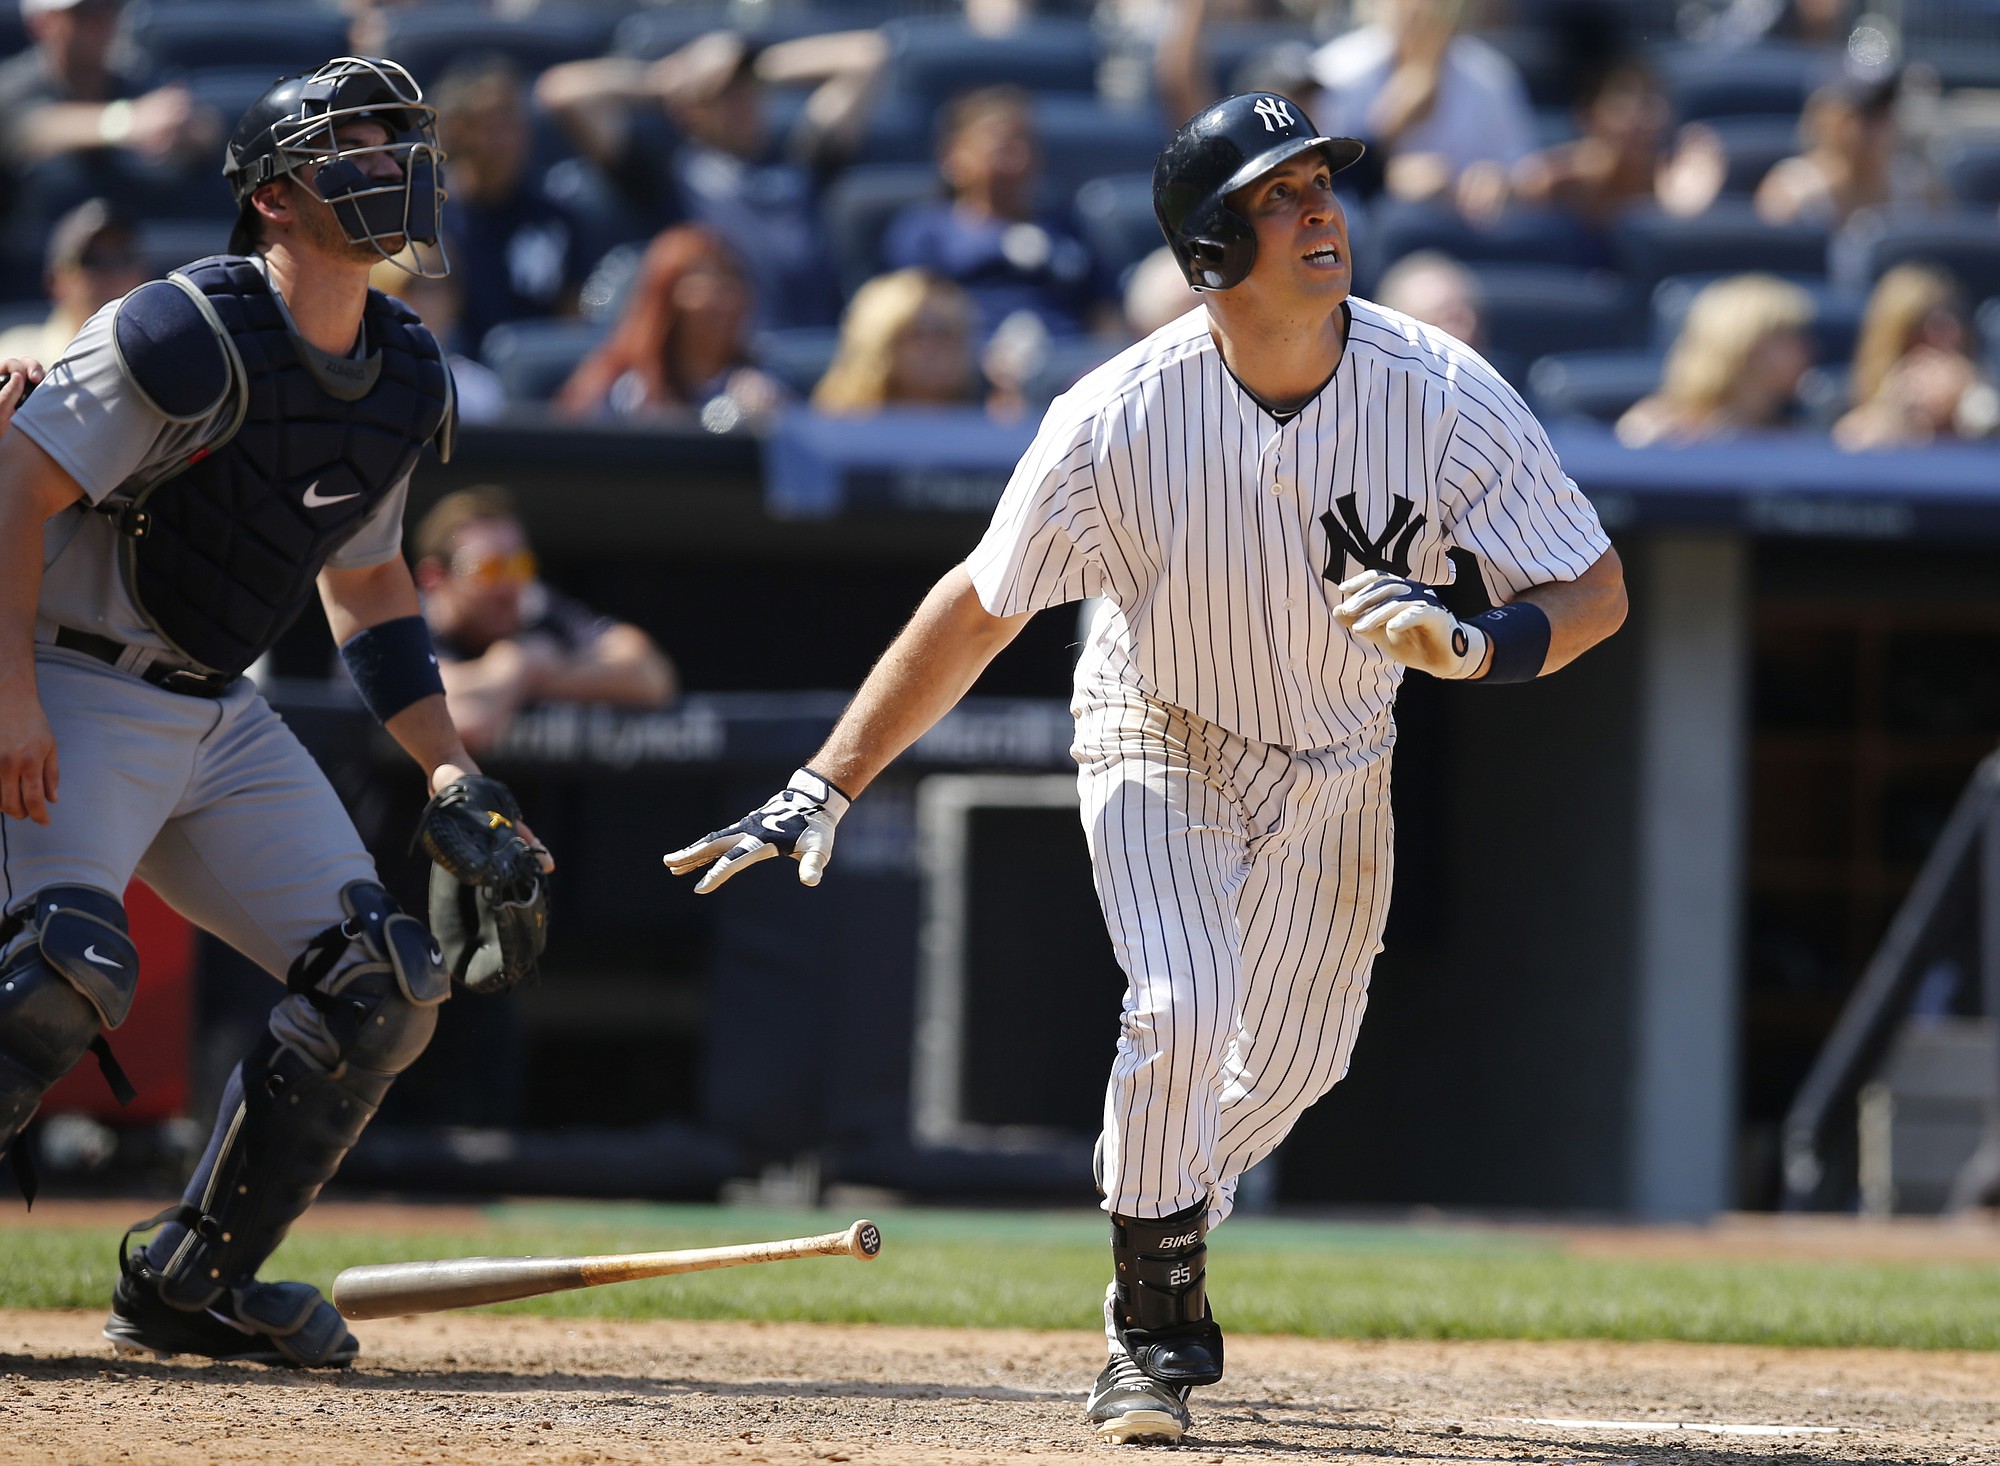 Seattle Mariners catcher Mike Zunino, left, and New York Yankees Mark Teixeira watch Texeira's eighth-inning, tie-breaking, go-ahead, solo home run at Yankee Stadium in New York, Sunday, July 19, 2015.